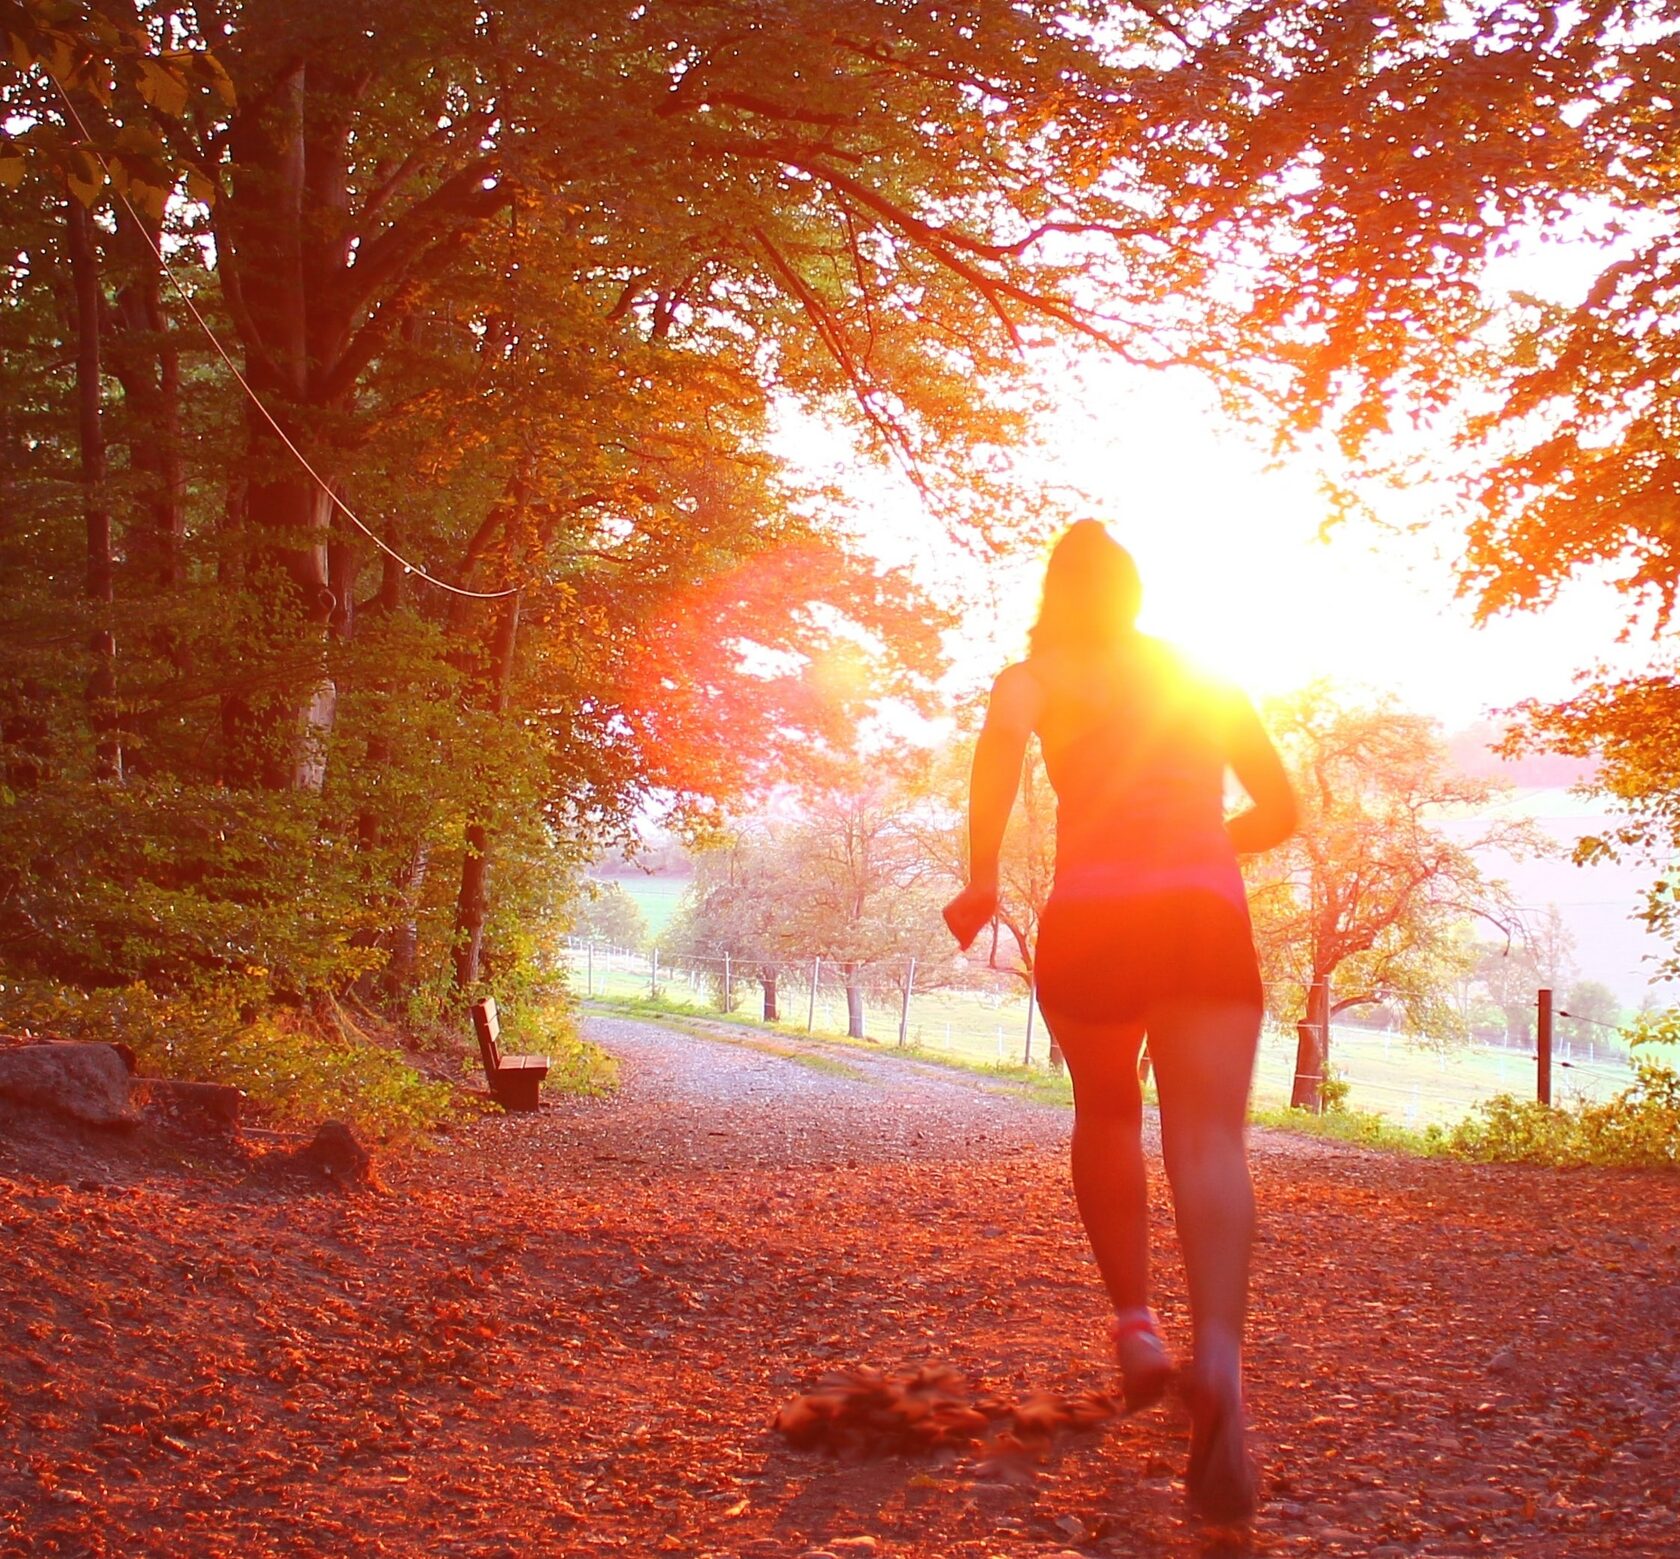 a woman on a run on a trail in the forest with leaves on the ground and sun shining through the trees at sunset